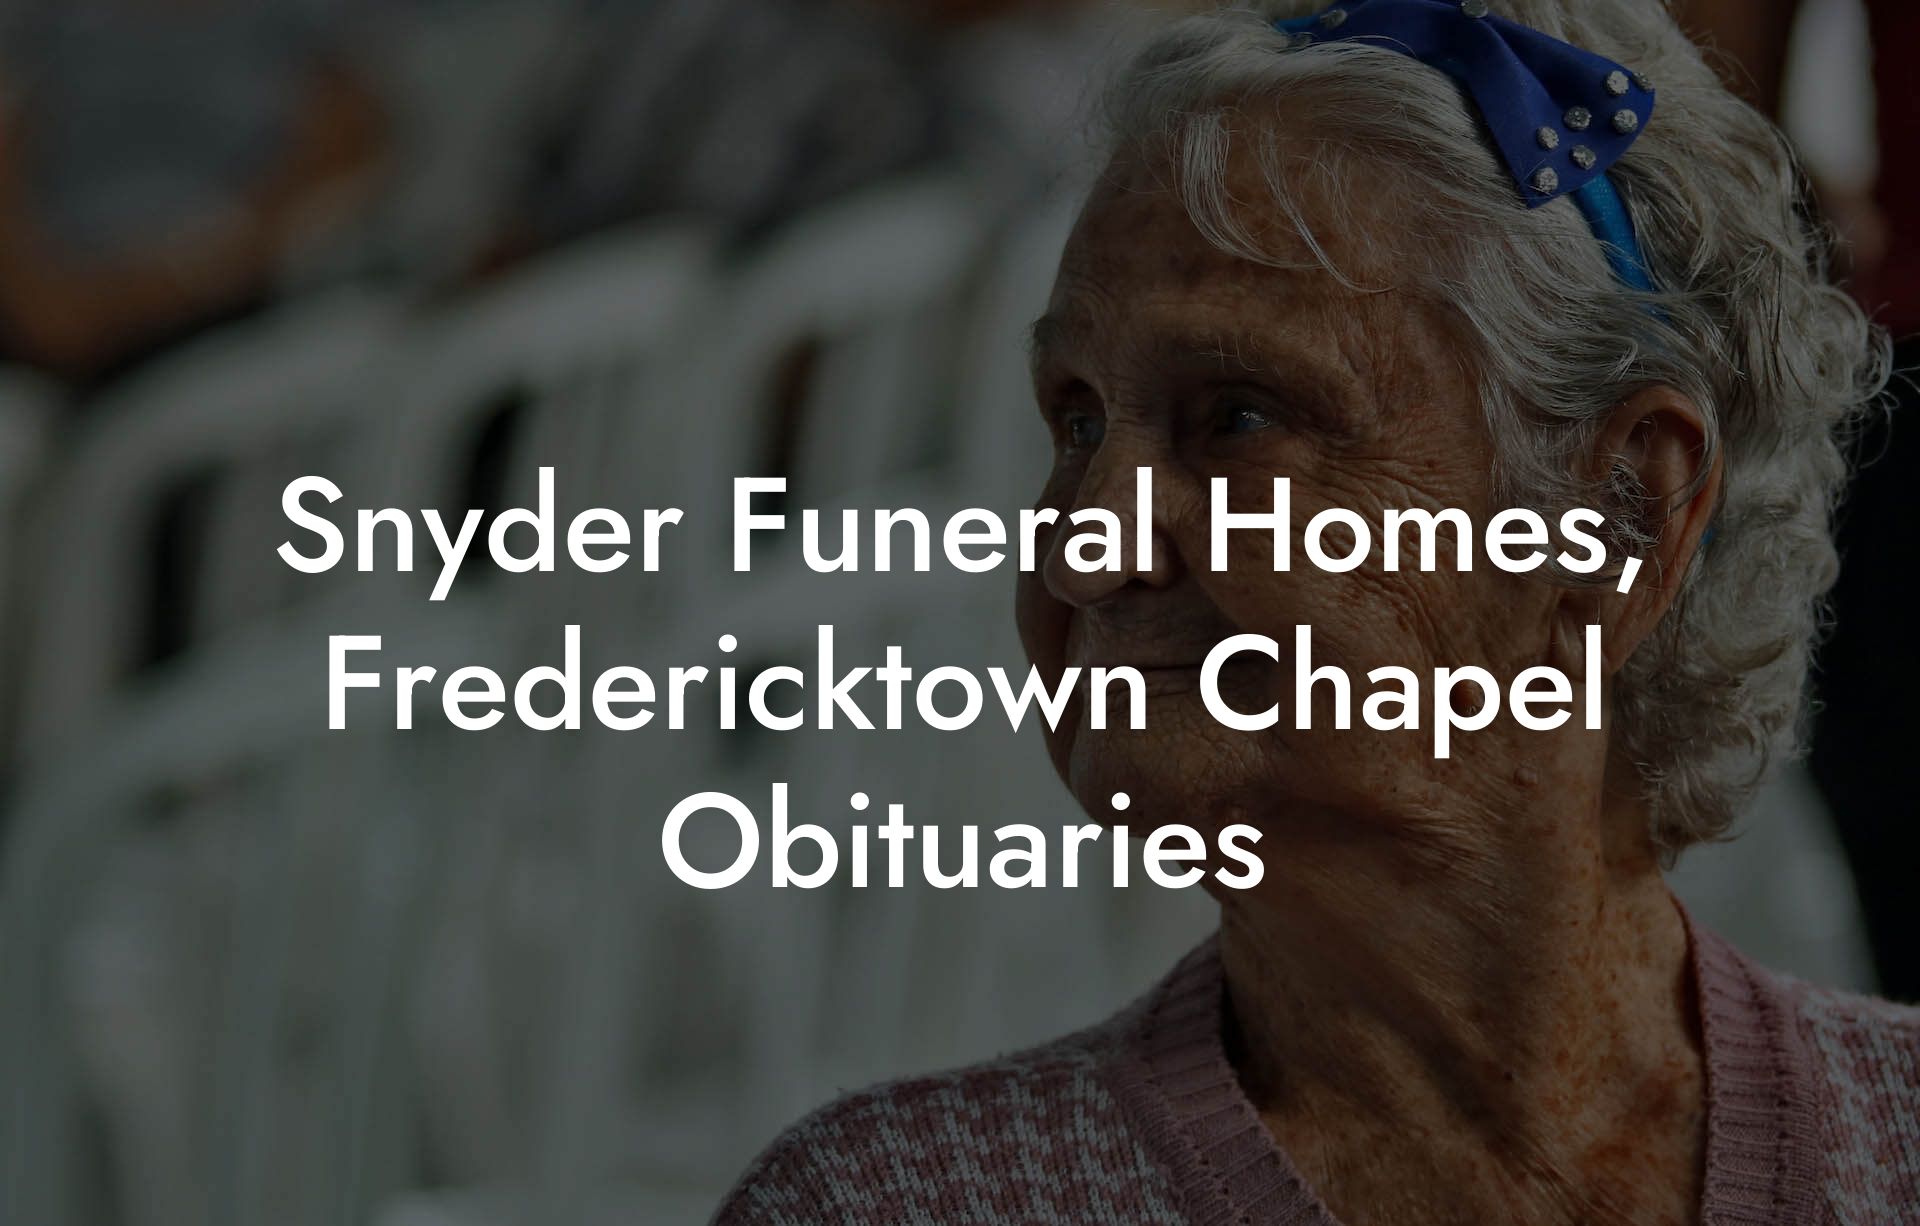 Snyder Funeral Homes, Fredericktown Chapel Obituaries